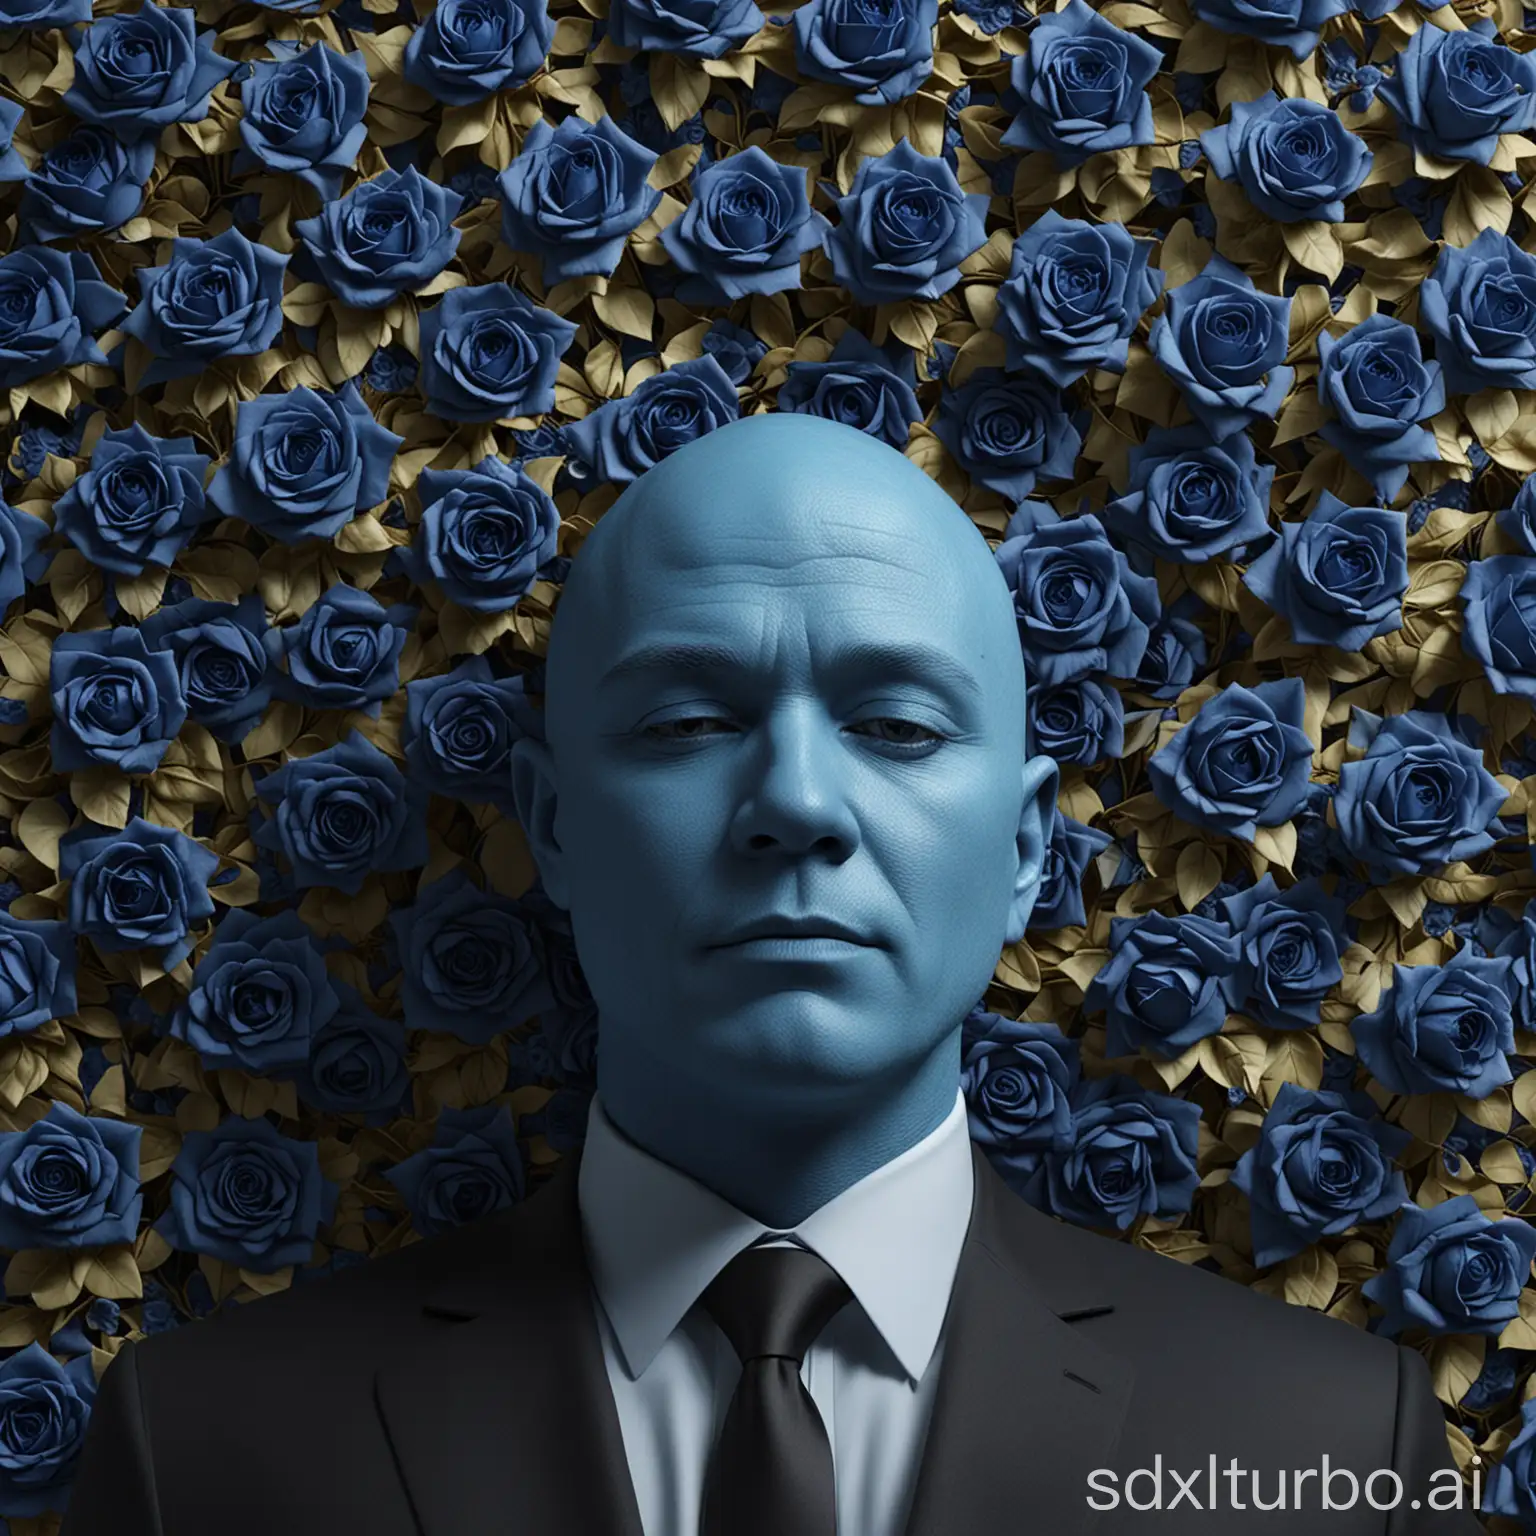 3D image of a 45-year-old man with a shaved face and a black suit and a blue tie behind his head is a wall of blue roses